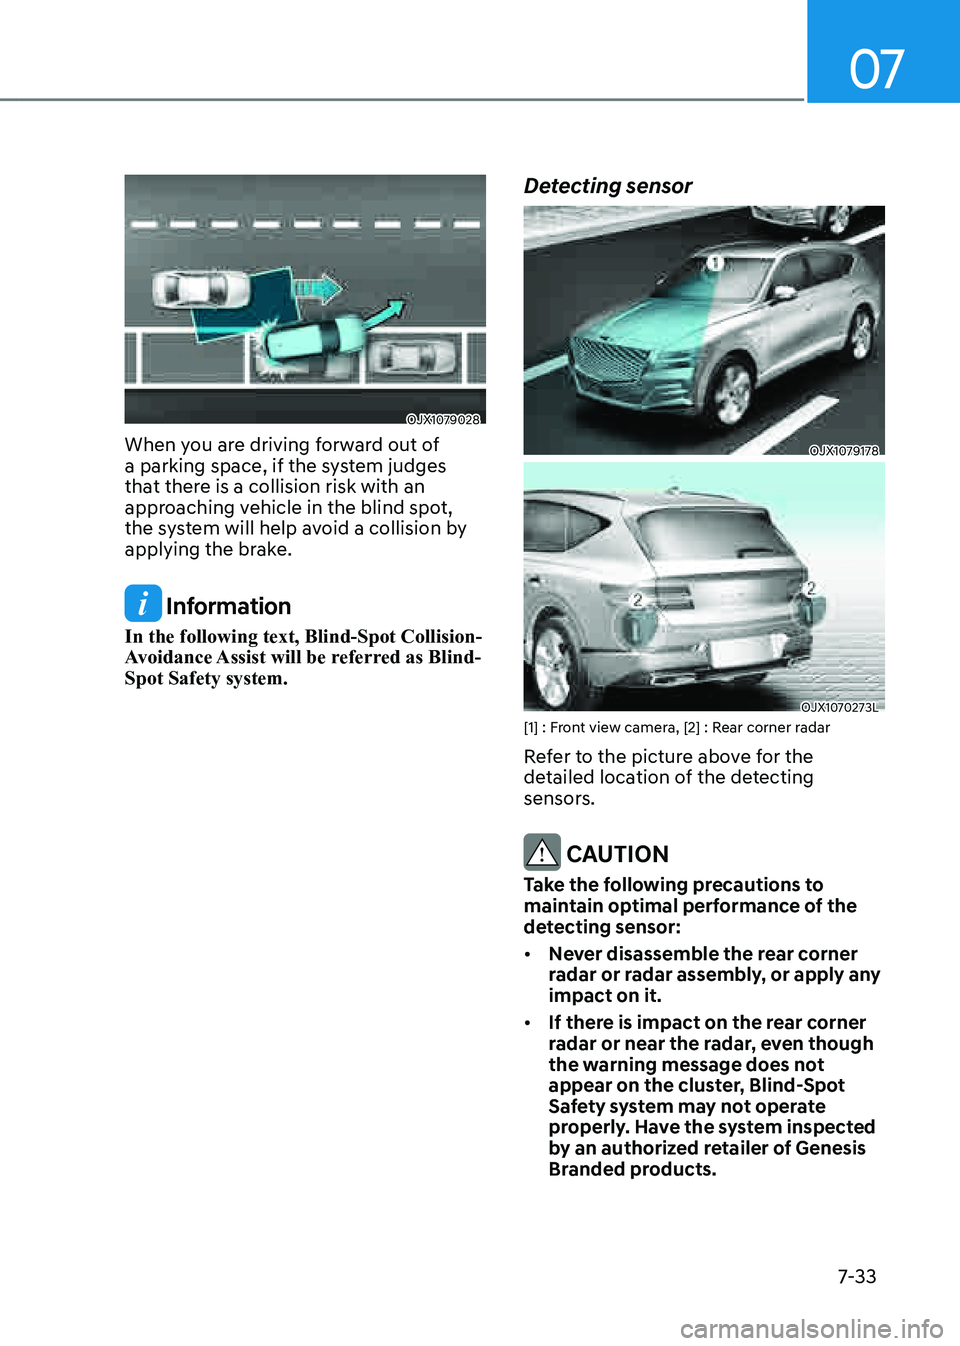 GENESIS GV80 2021  Owners Manual 07
7-33
OJX1079028 OJX1079028 
When you are driving forward out of 
a parking space, if the system judges 
that there is a collision risk with an 
approaching vehicle in the blind spot, 
the system wi